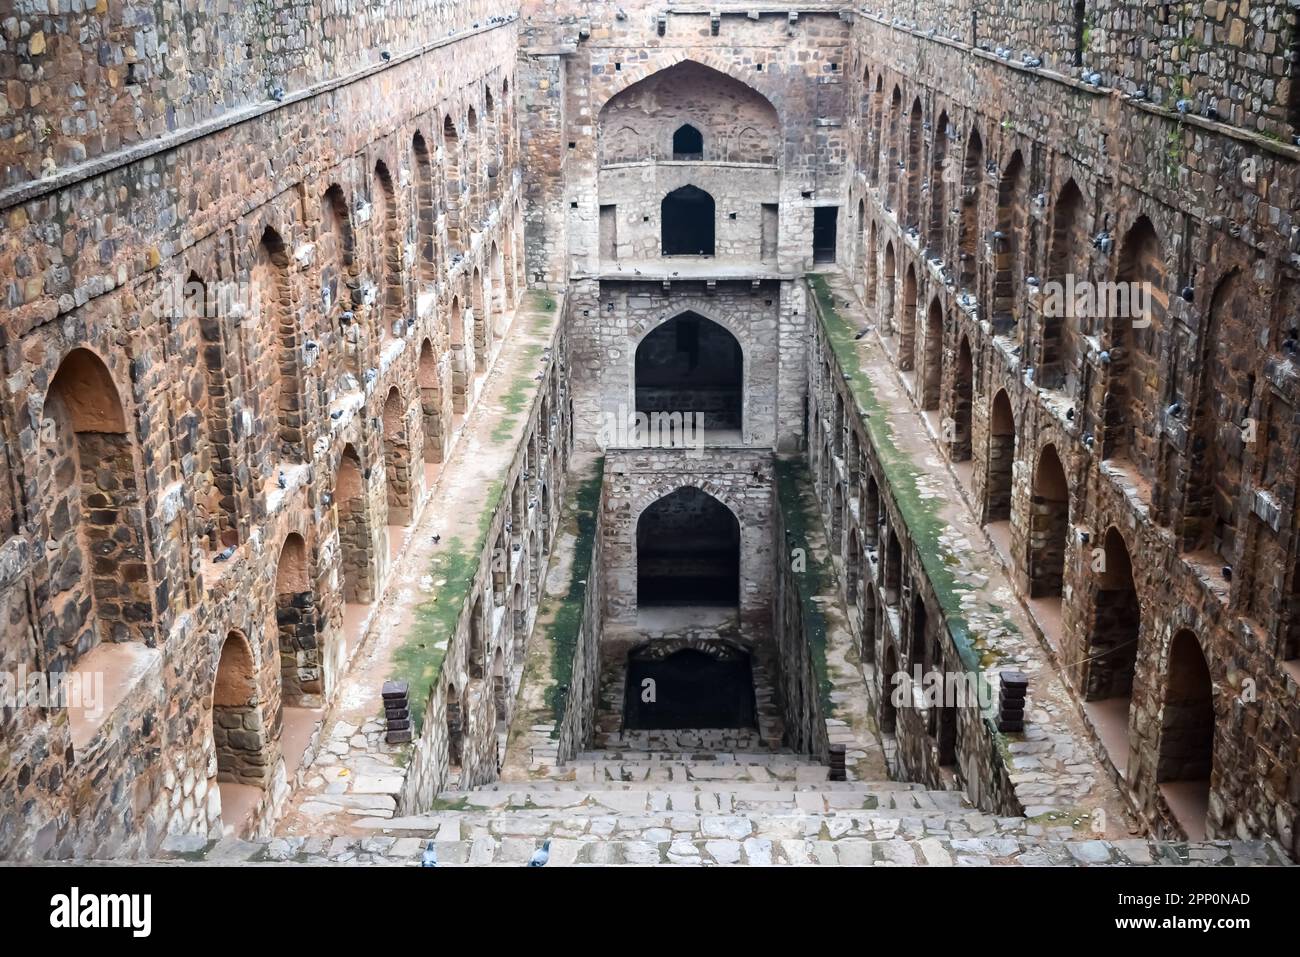 Agrasen Ki Baoli - Step Well situated in the middle of Connaught placed New Delhi India, Old Ancient archaeology Construction Stock Photo